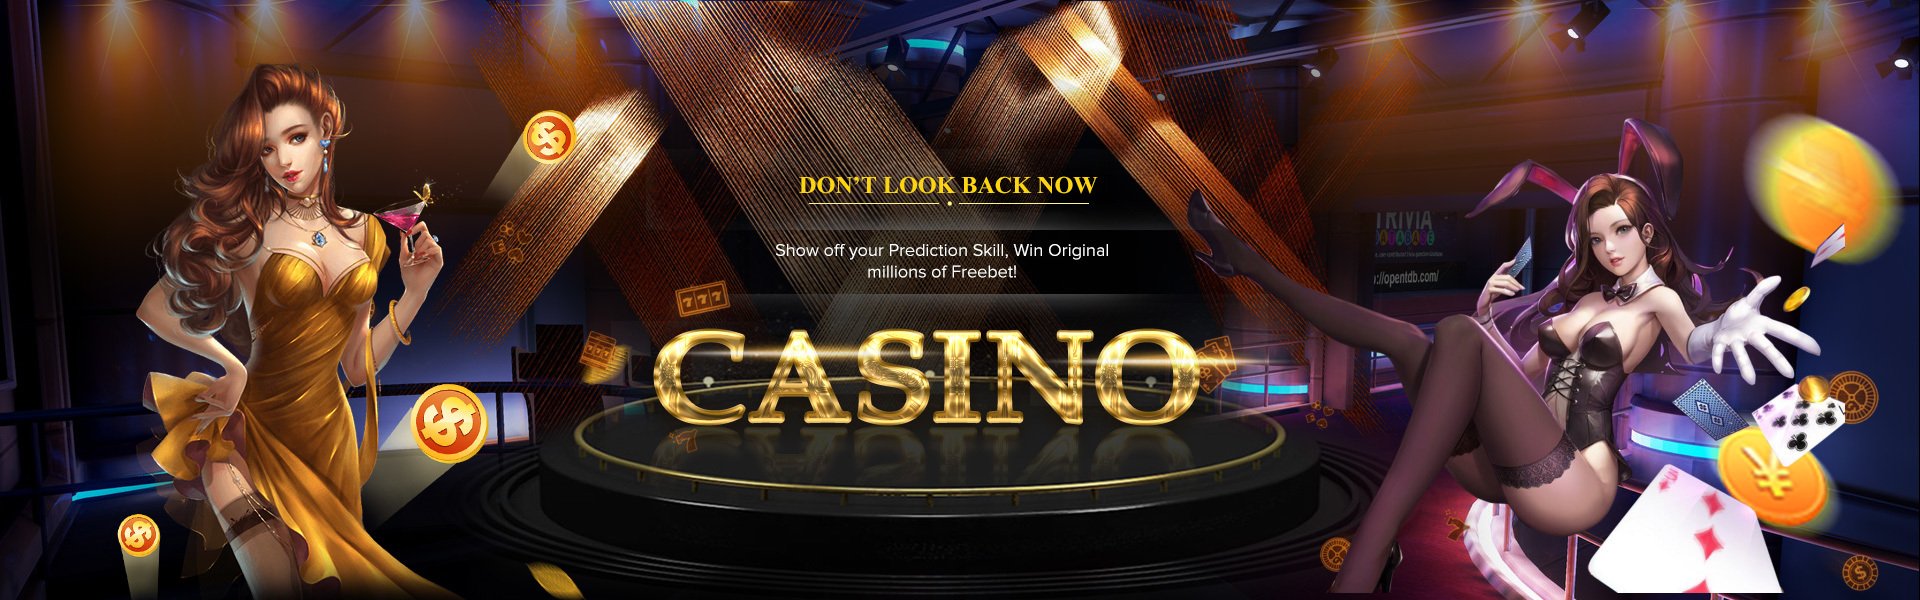 IS THE CASINO IS SECURE AND TRUSTED WHERE YOU ARE PLAYING?